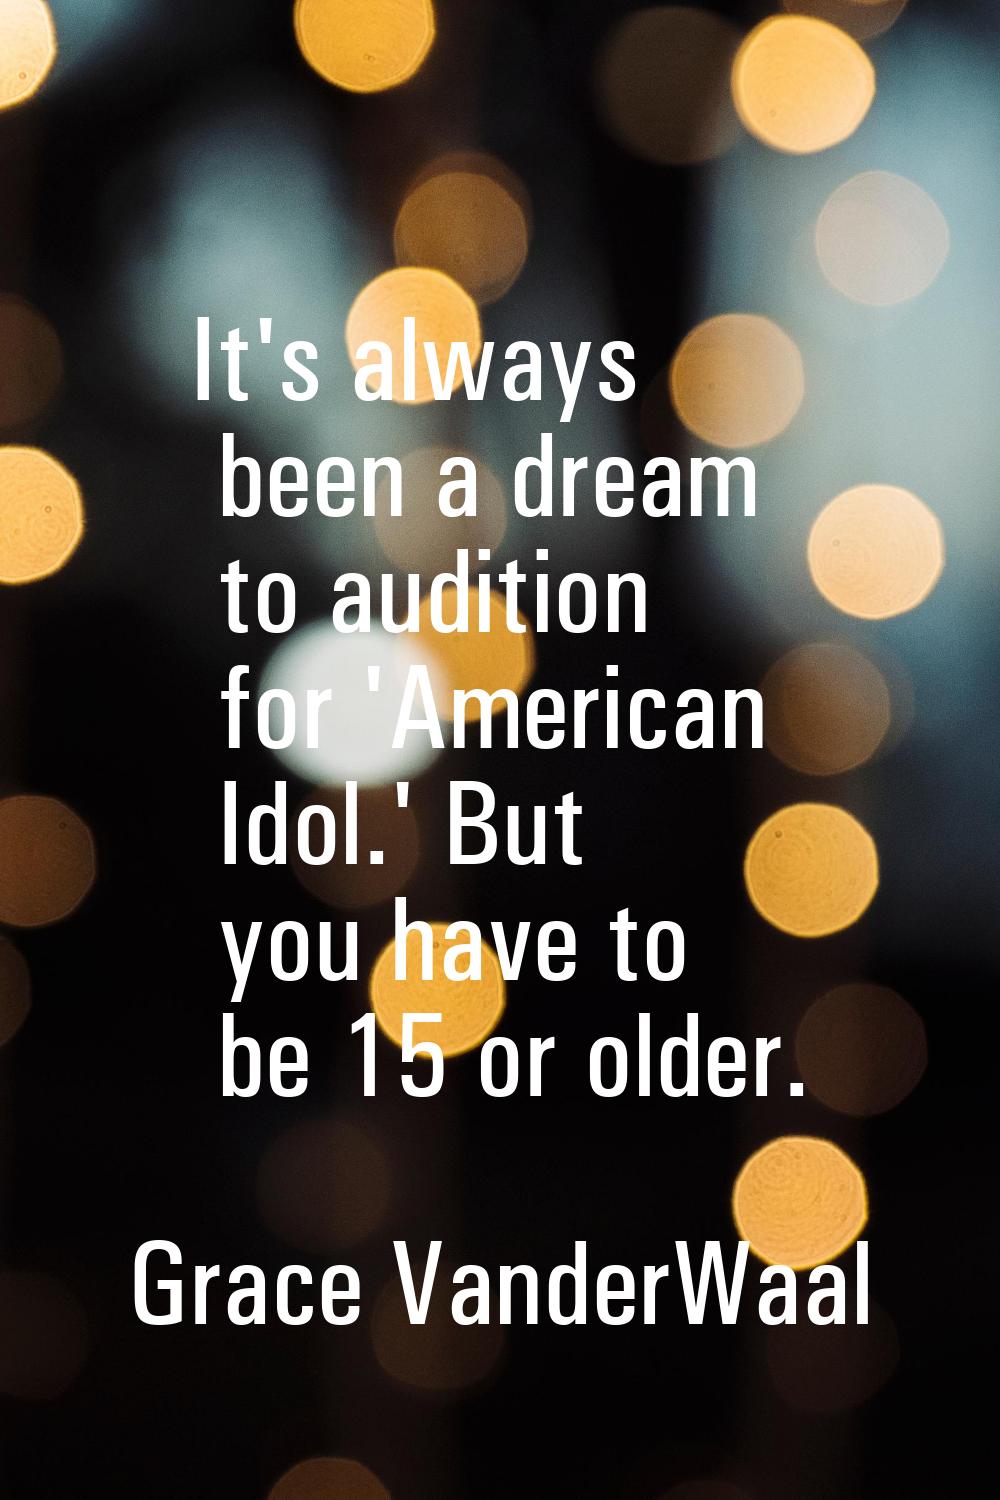 It's always been a dream to audition for 'American Idol.' But you have to be 15 or older.